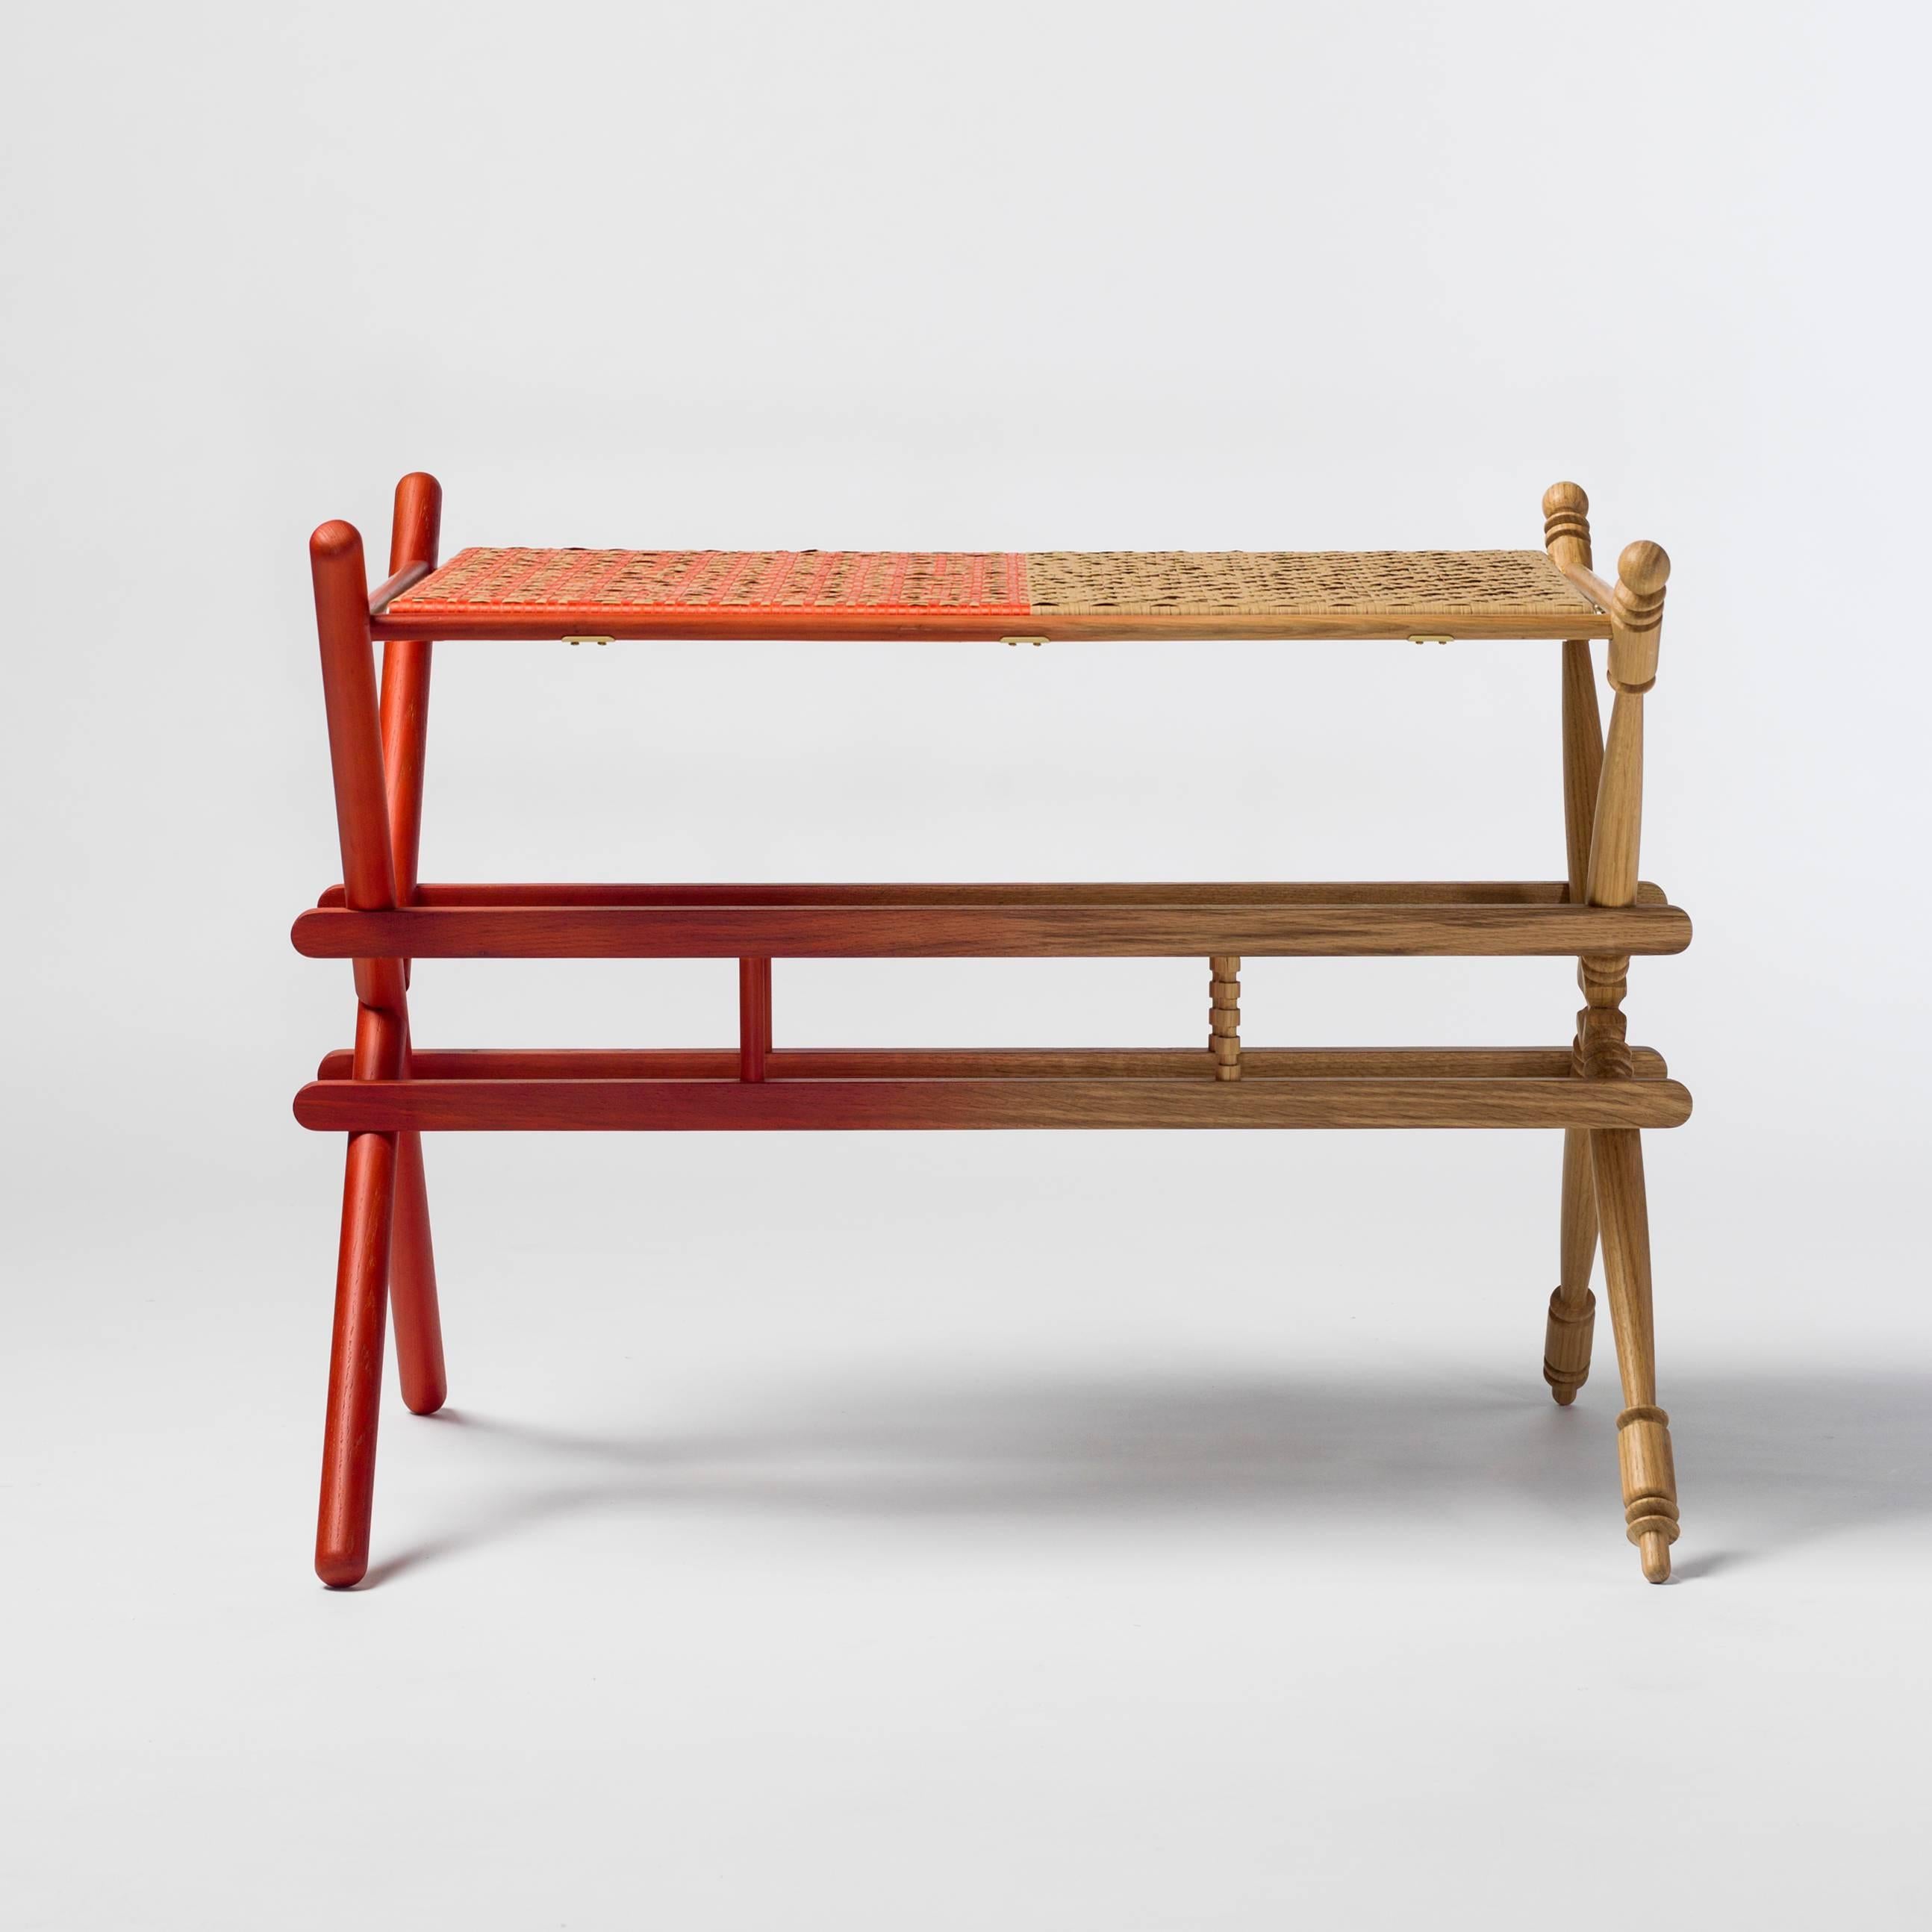 Solid oak structure with degraded red finish and tray made
with craft paper and red textile ribbon.

Limited Edition of eight units, two artist proofs and two prototypes.

Measures: 88 x 63 x 62 H cm.